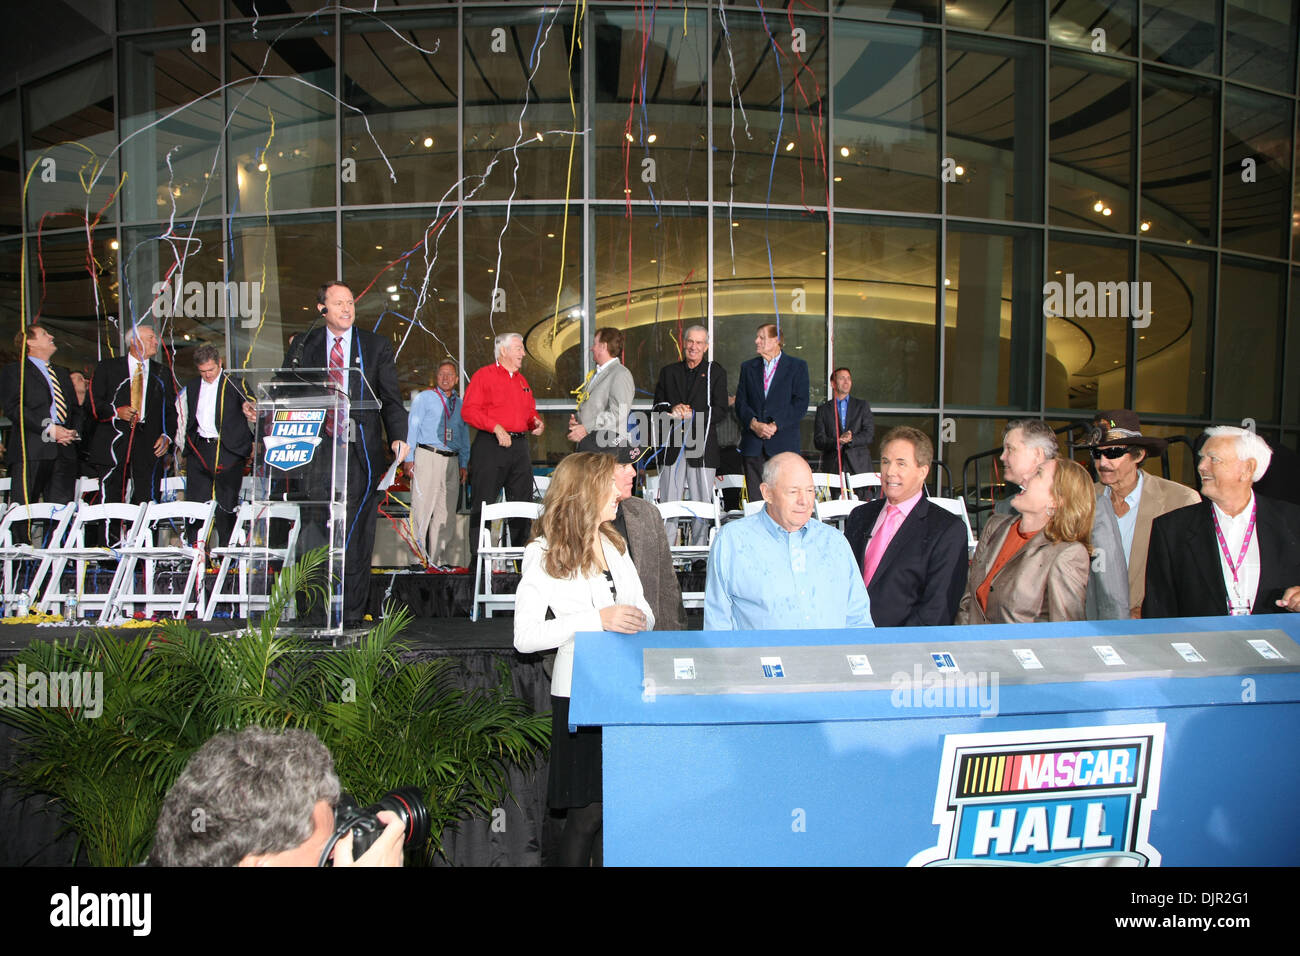 May 11, 2010 - Charlotte, North Carolina, U.S. - Grand Opening of the Nascar Hall of Fame festivities saw from left, TERESA EARNHARDT, RON HORNADAY JR., JACK INGRAM, DARELL WALTRIP, LISA FRANCE KENNEDY, BRIAN FRANCE (behind Lisa France Kennedy), RICHARD PETTY and JUNIOR JOHNSON along with WINSTON KELLY at the podium welcome guests to the newly opened Hall of Fame. The Nascar Hall o Stock Photo